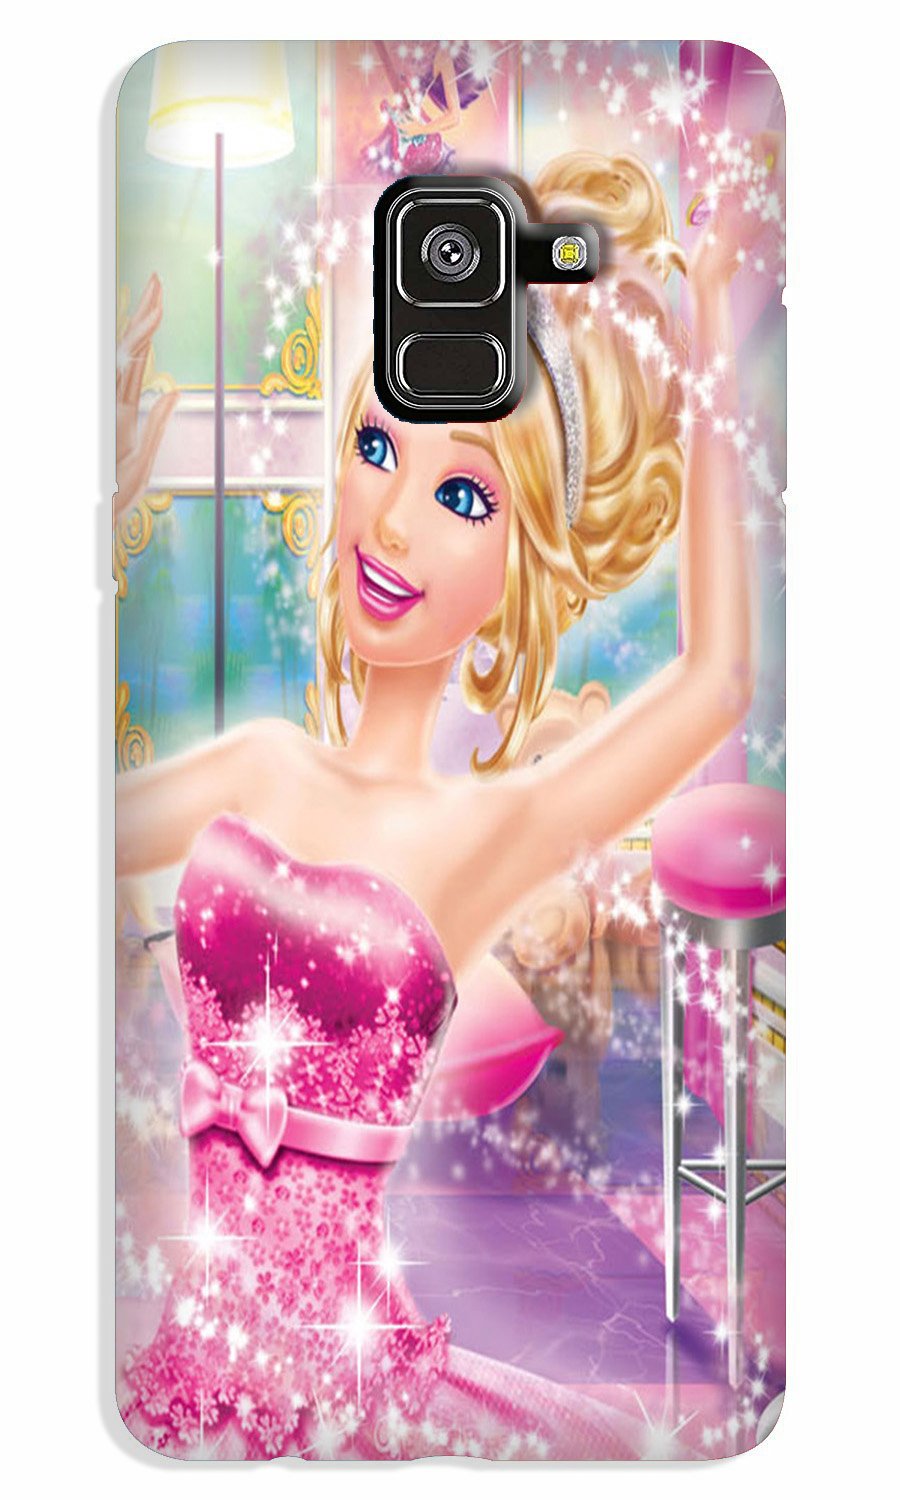 Princesses Case for Galaxy J6 / On6